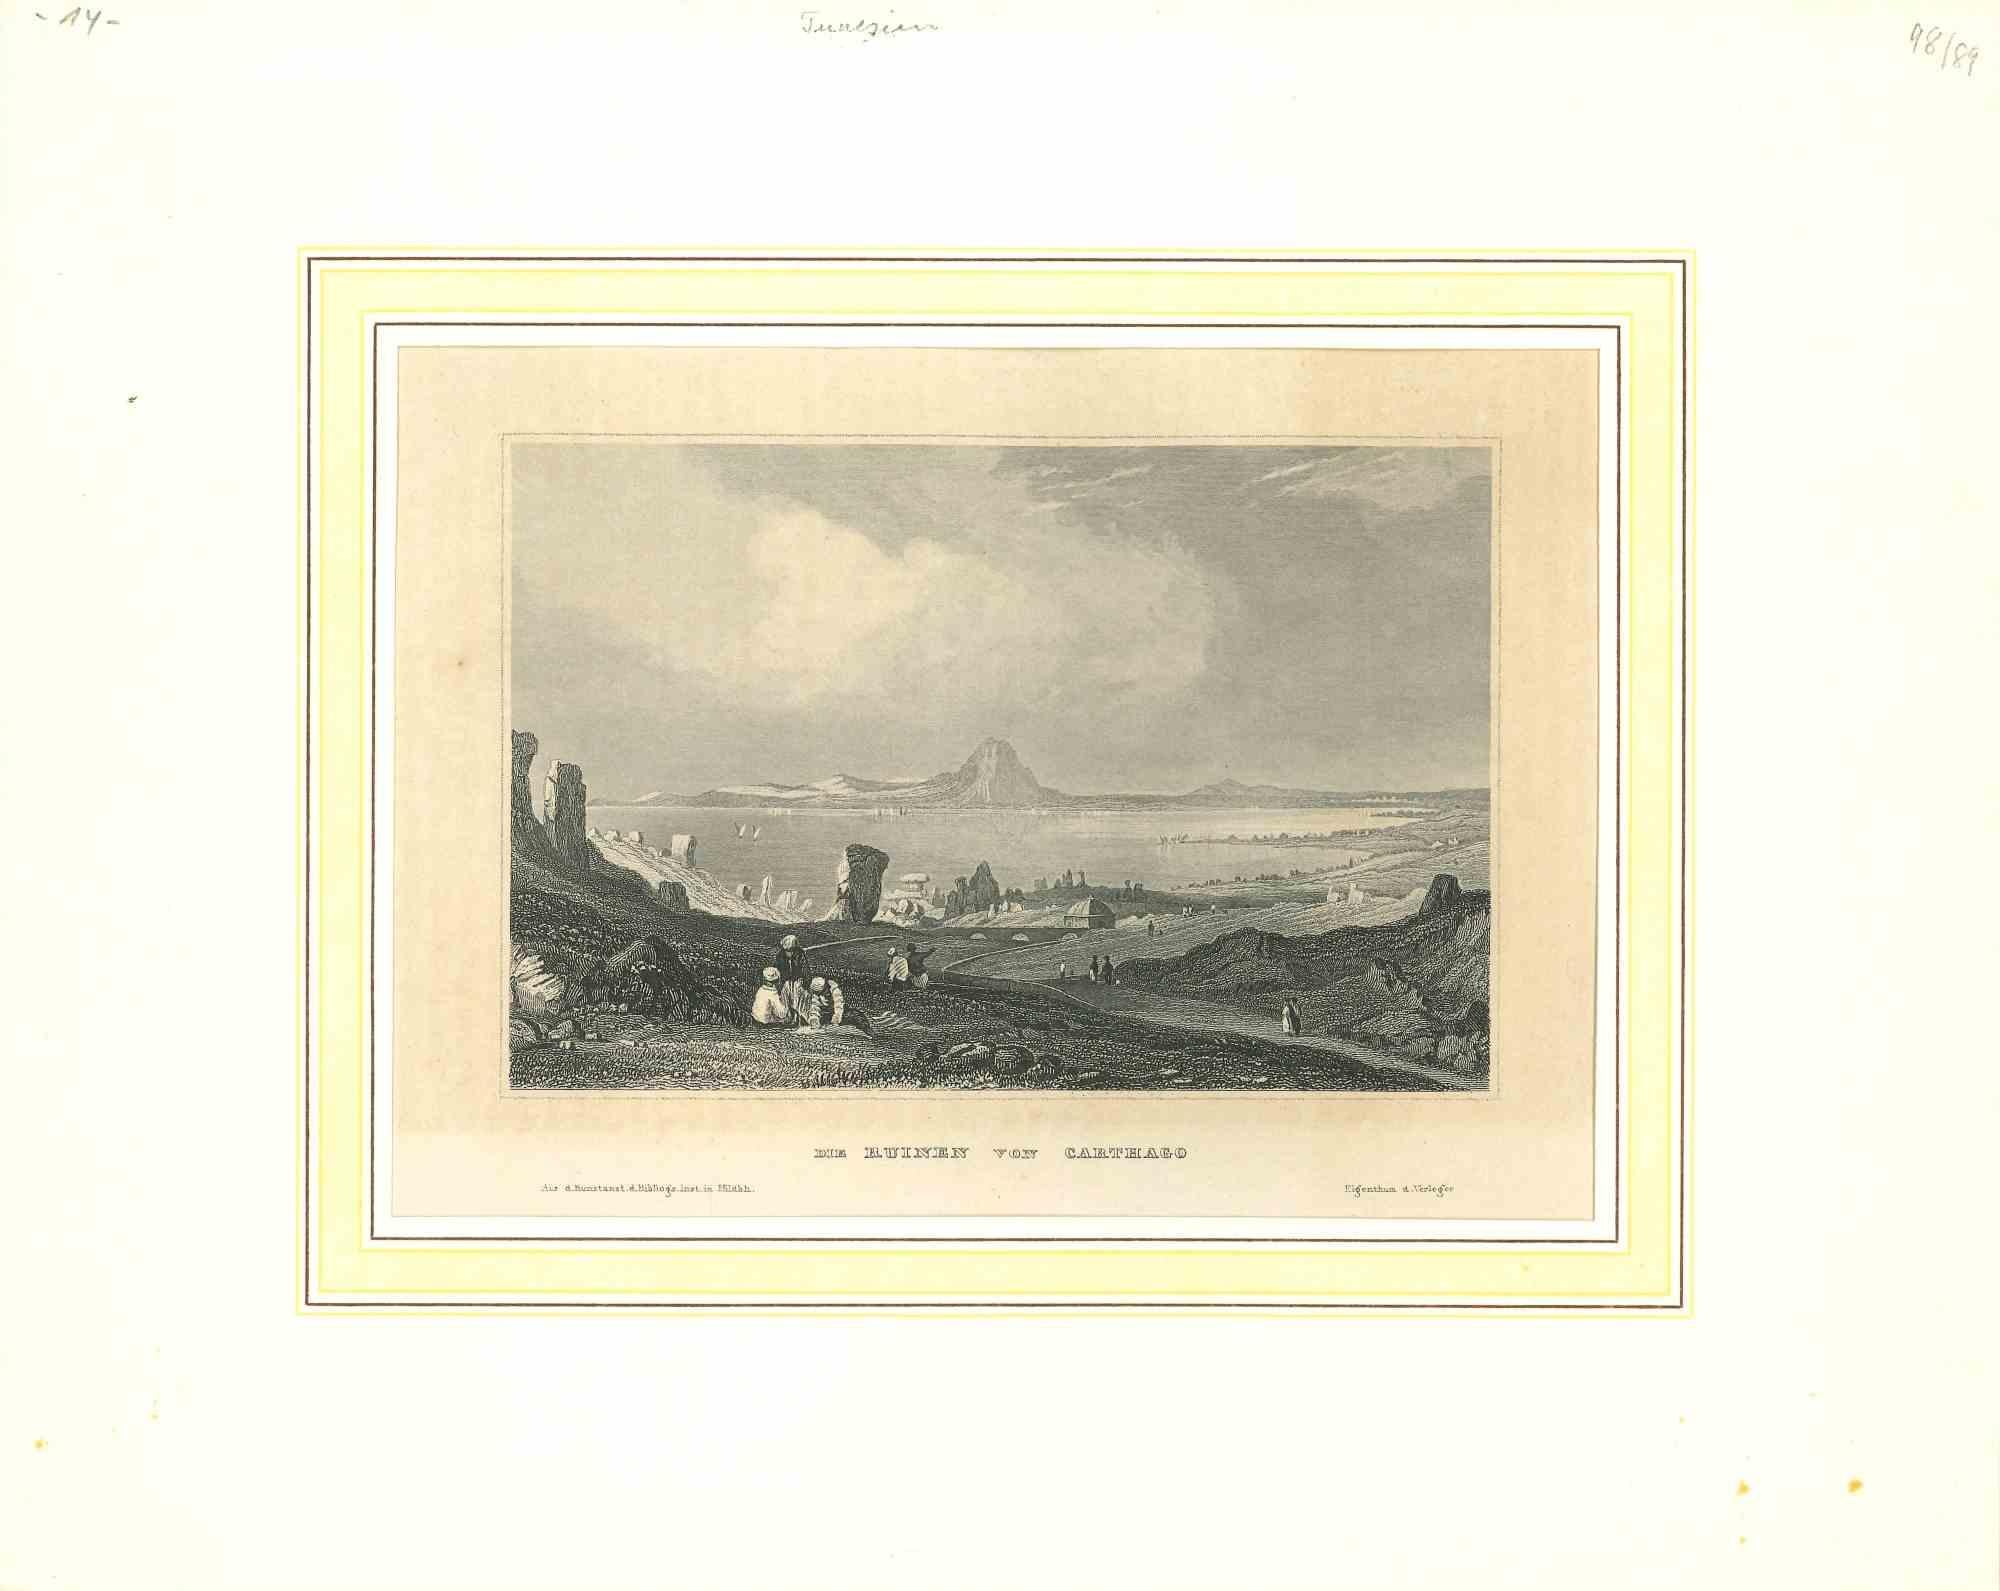 Unknown Figurative Print - Carthage - Original Lithograph - Early 19th Century